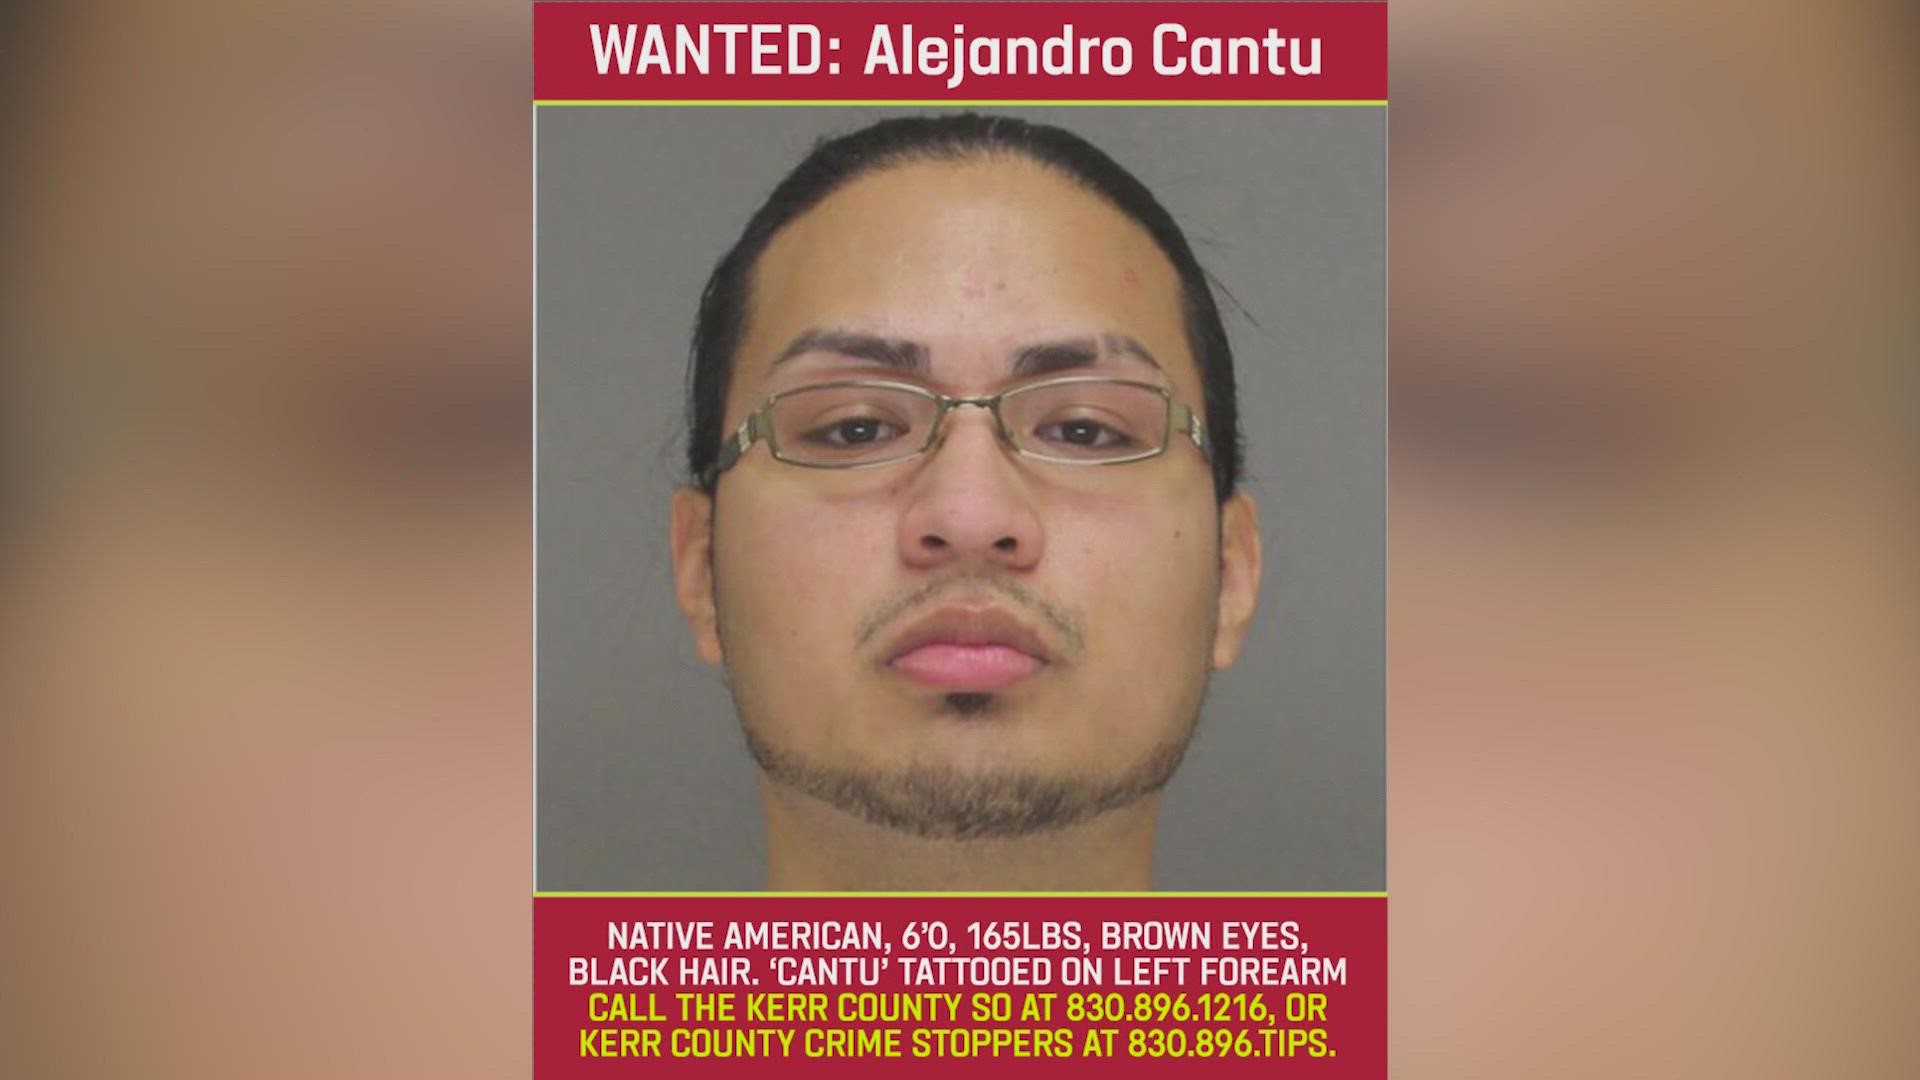 Alejandro and Gustavo Cantu are suspects in a murder in Green Bay Wisconsin, and were believed to be in Ingram. Gustavo was arrested, and Alejandro remains at large.